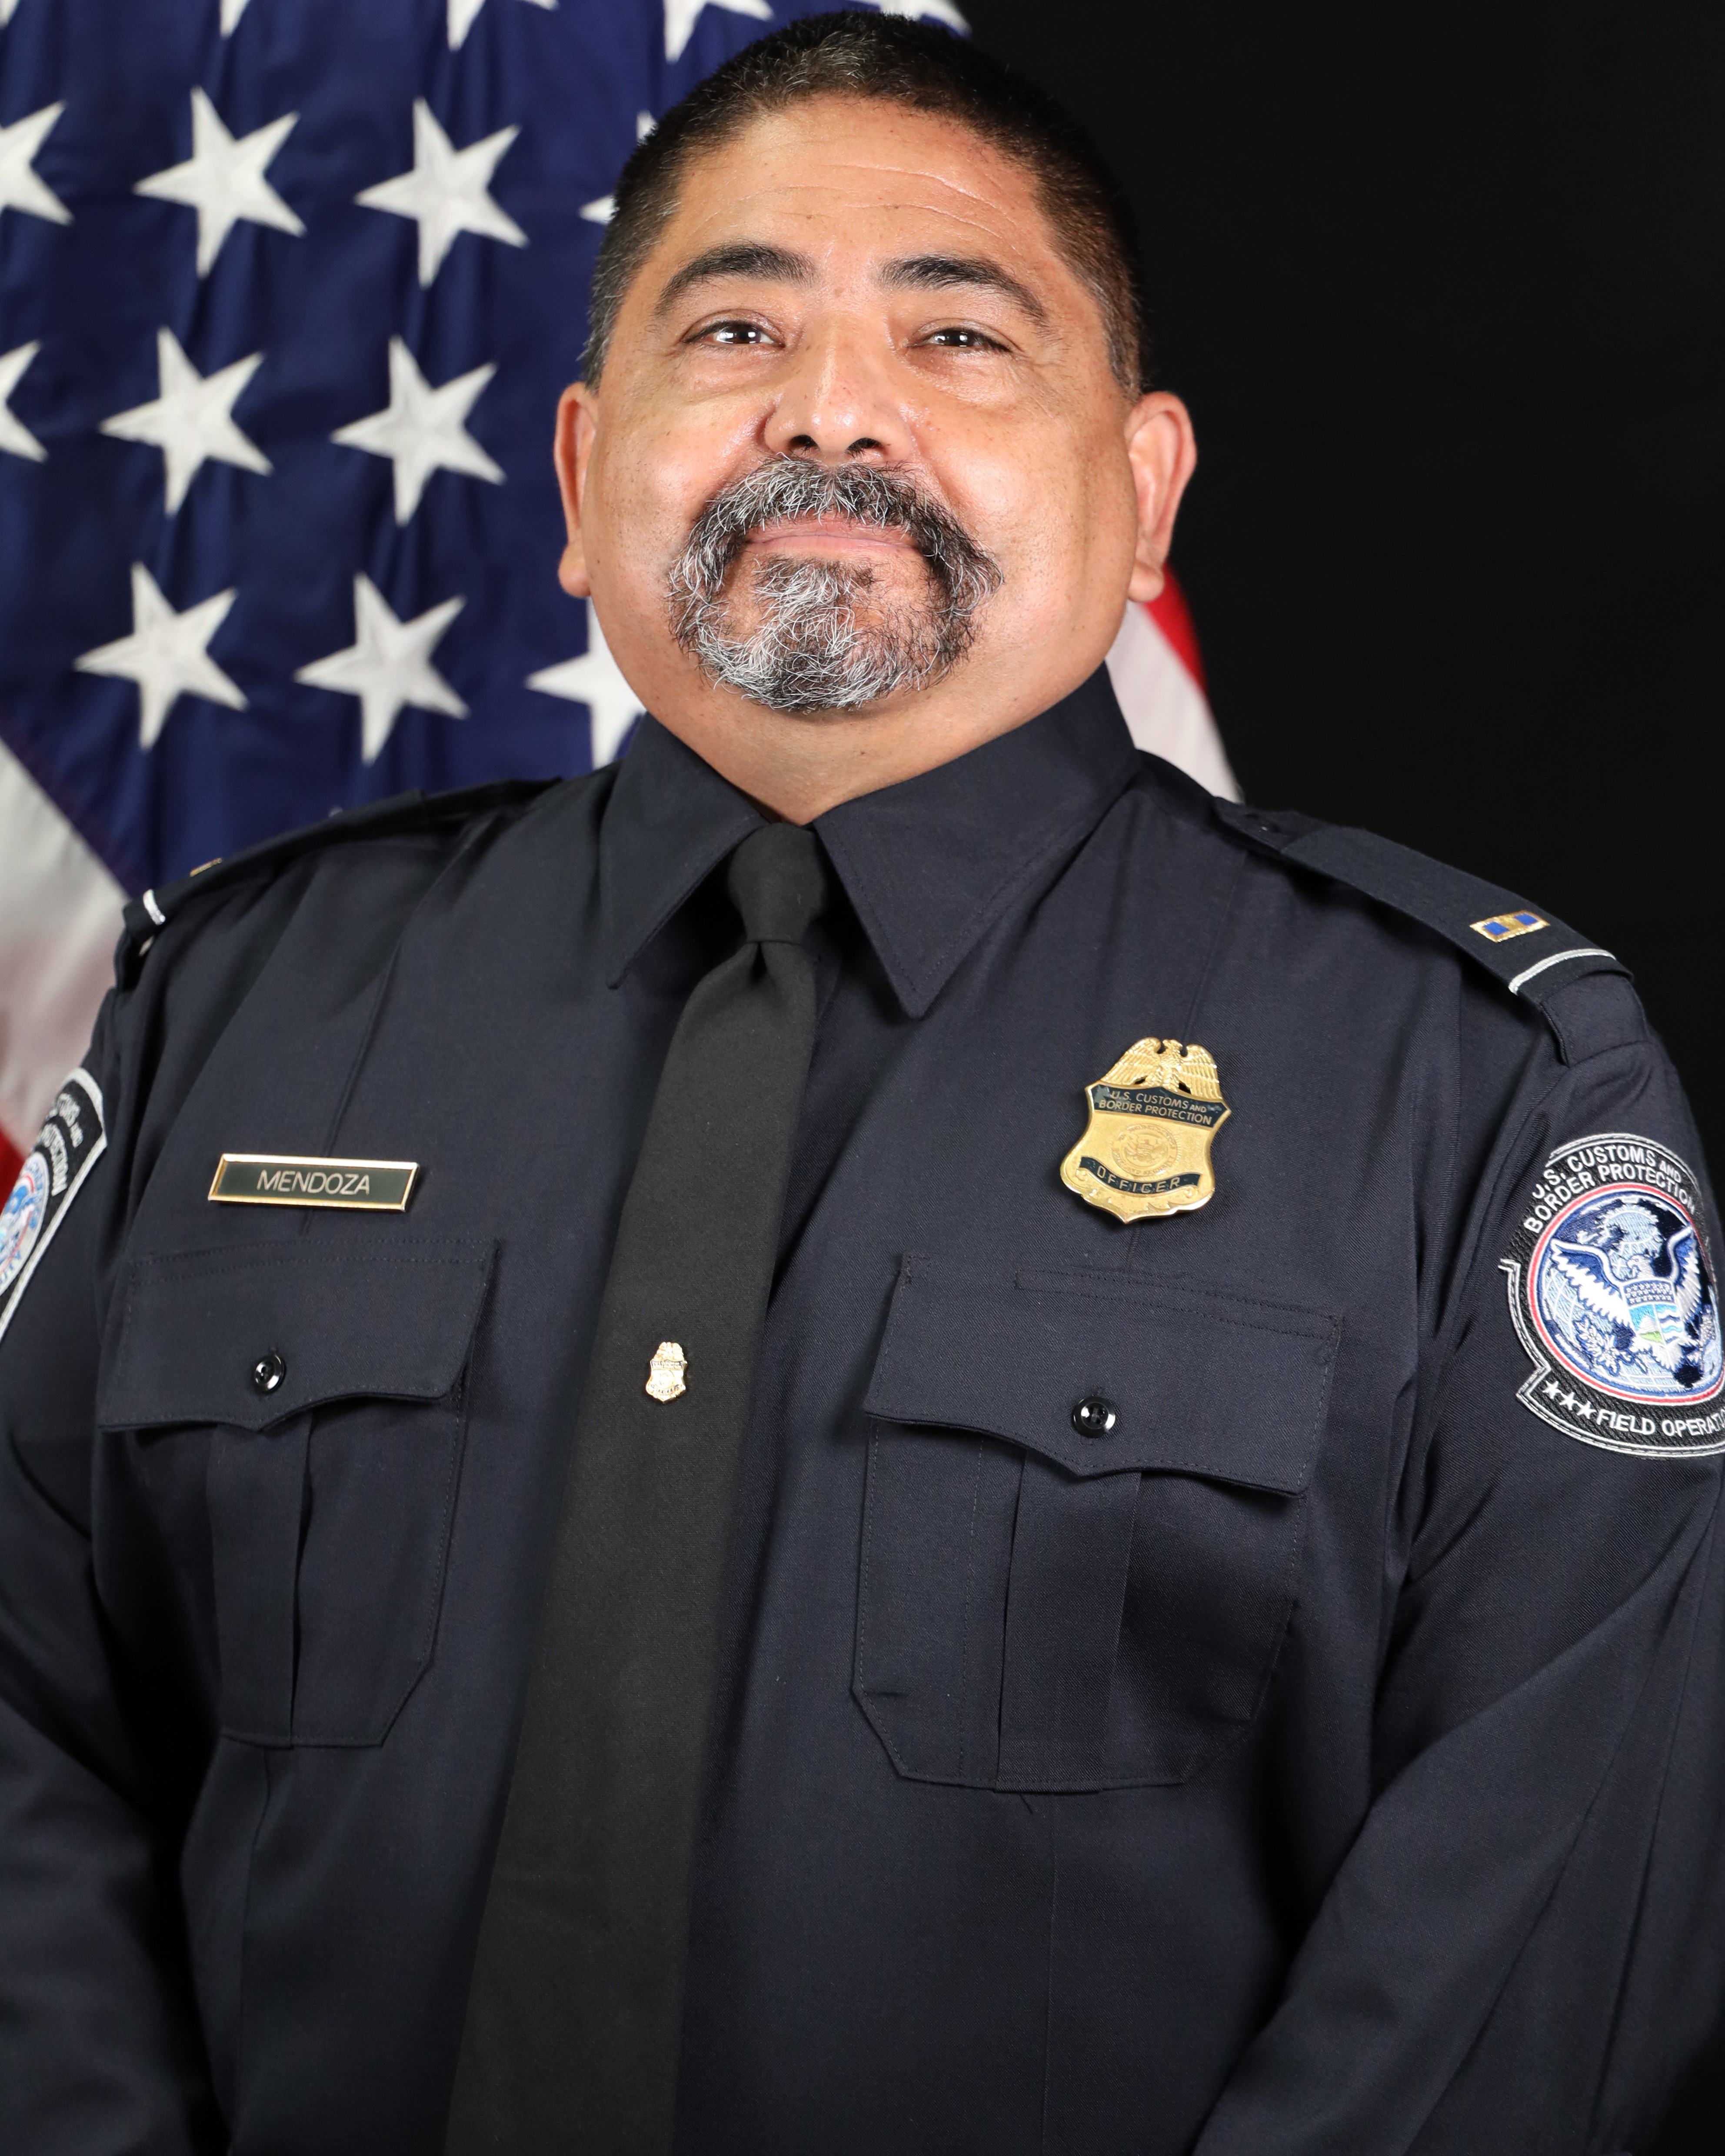 Officer Carlos Mendoza | United States Department of Homeland Security - Customs and Border Protection - Office of Field Operations, U.S. Government